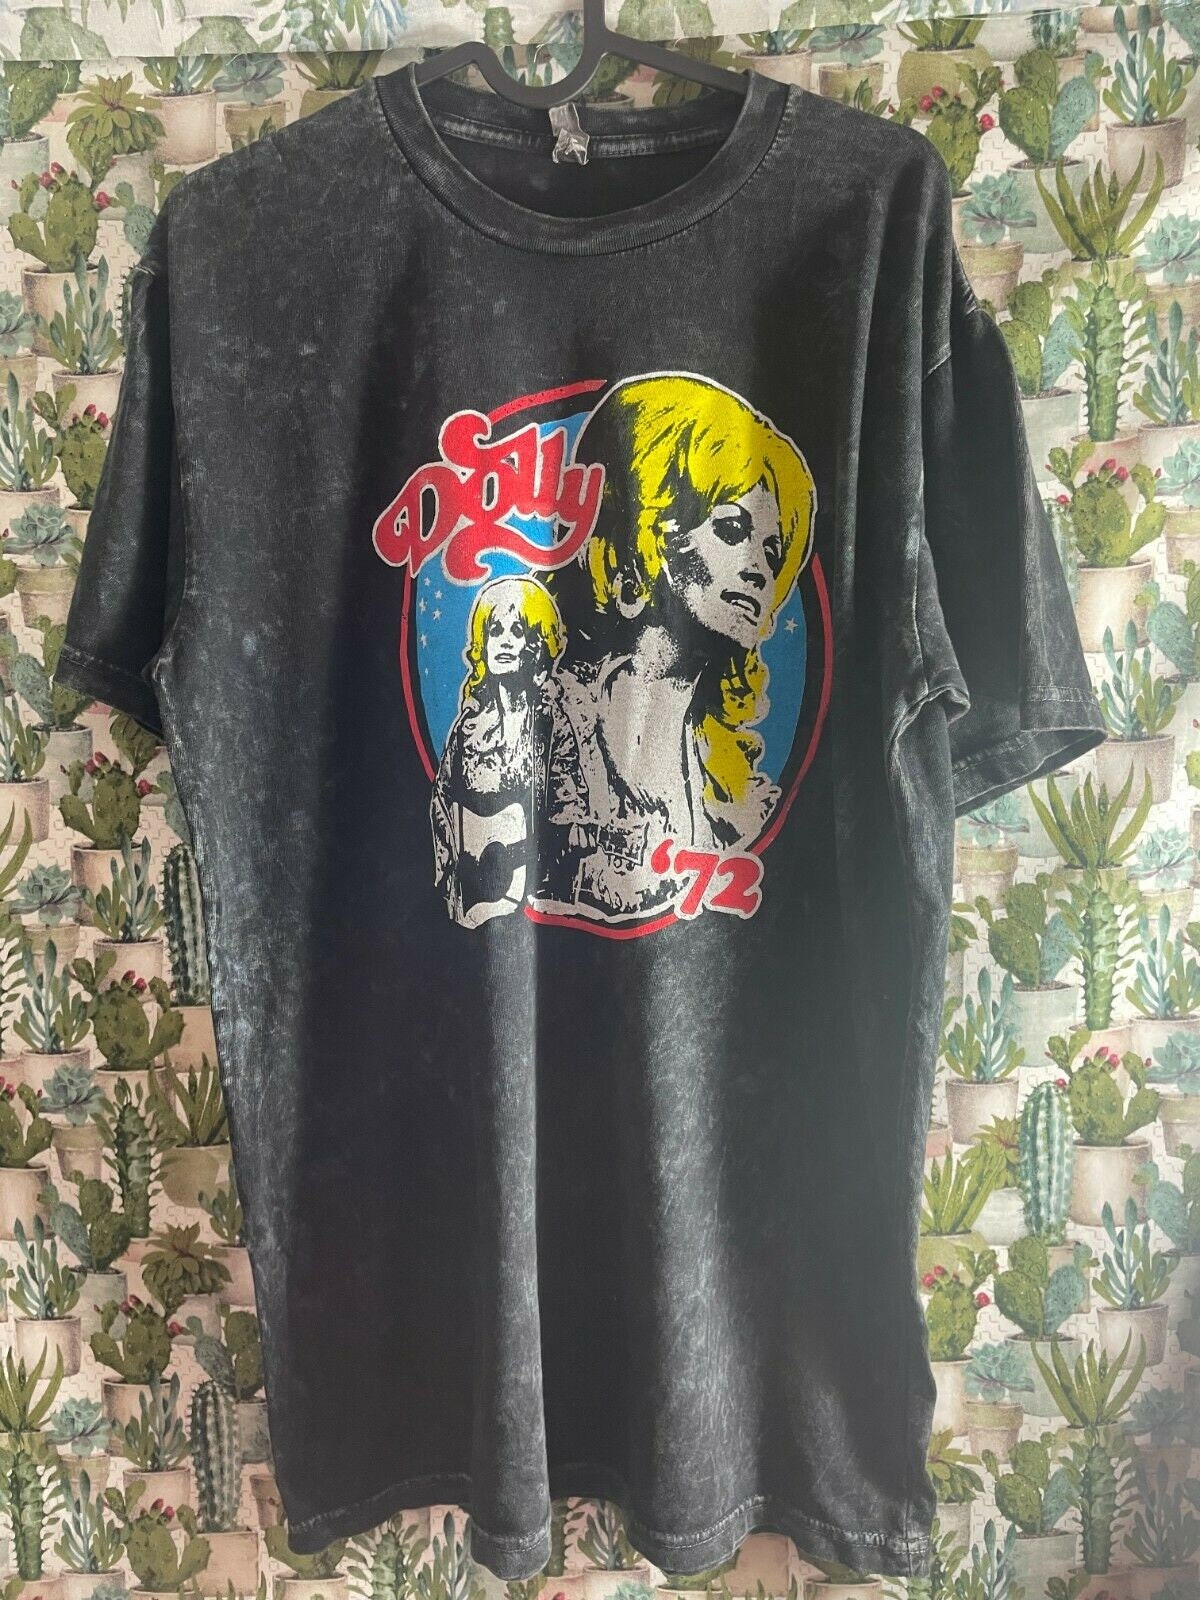 Vintage Dolly Parton '72 Graphic T-shirt - Etsy